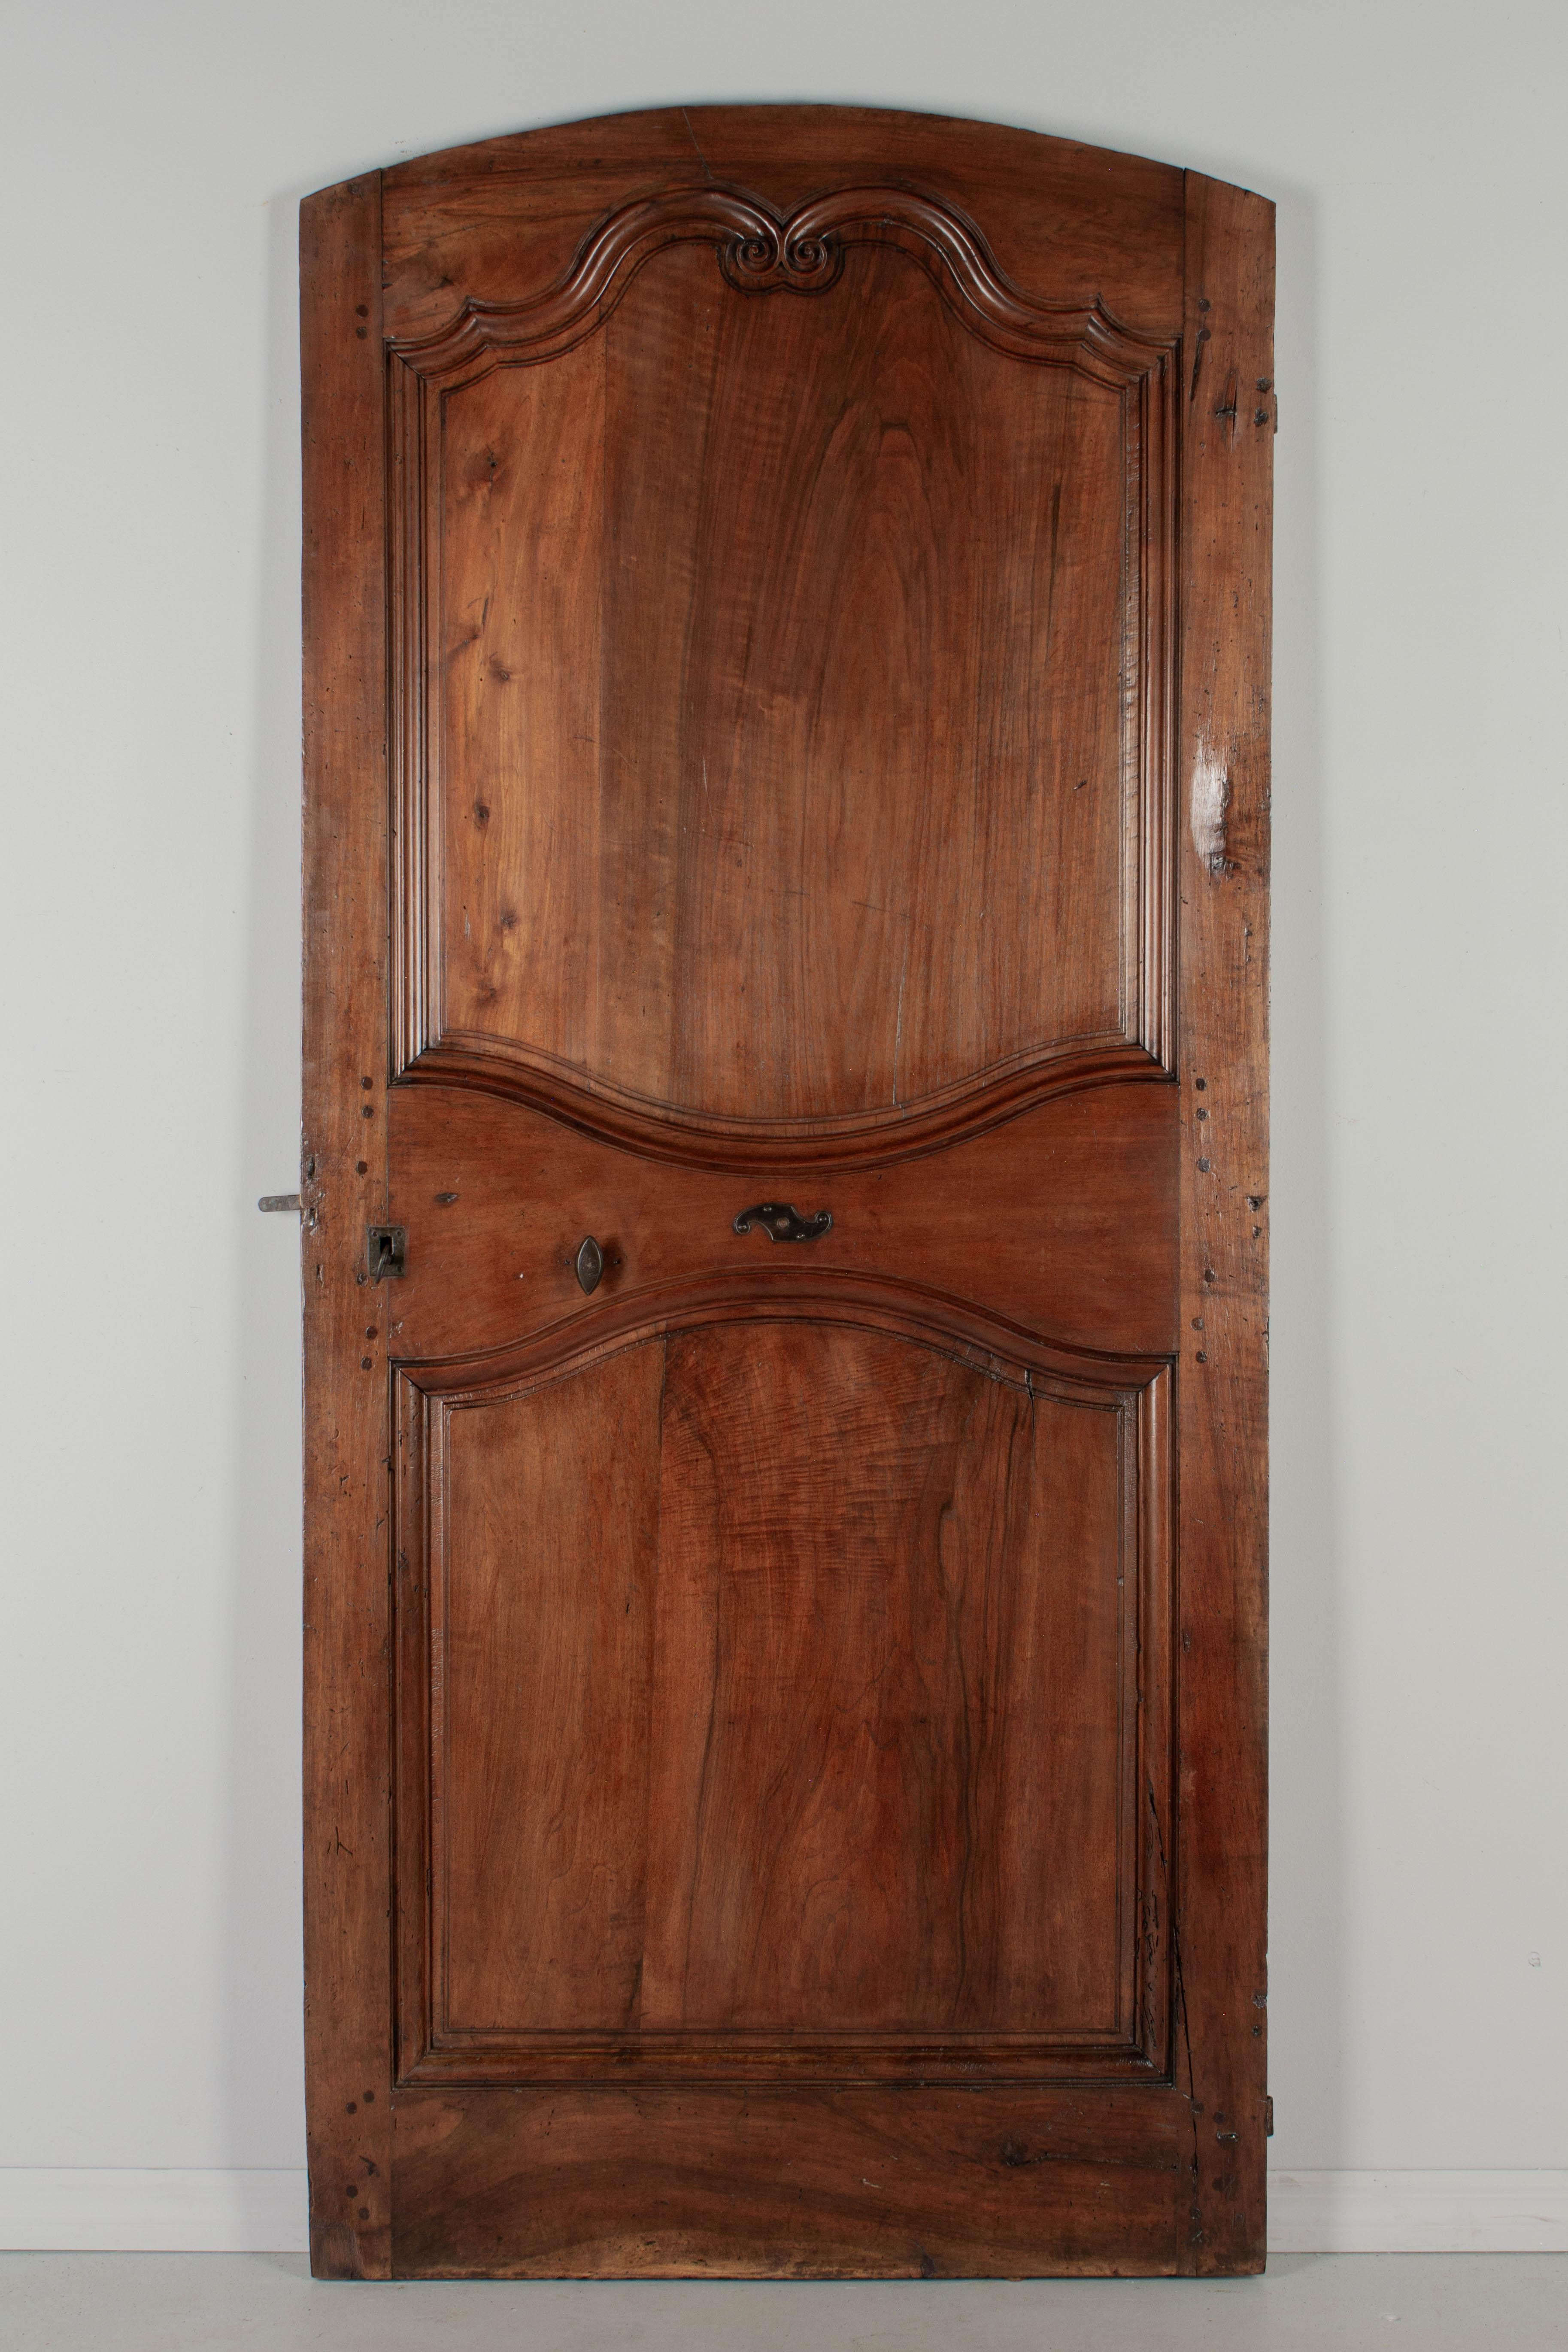 A 19th Century Louis XV style walnut door from the Loire Valley. This two sided interior door is made of thick planks of solid walnut with hand carved scroll decoration typical of the region. Large iron hinges. Working lock and key. Pegged